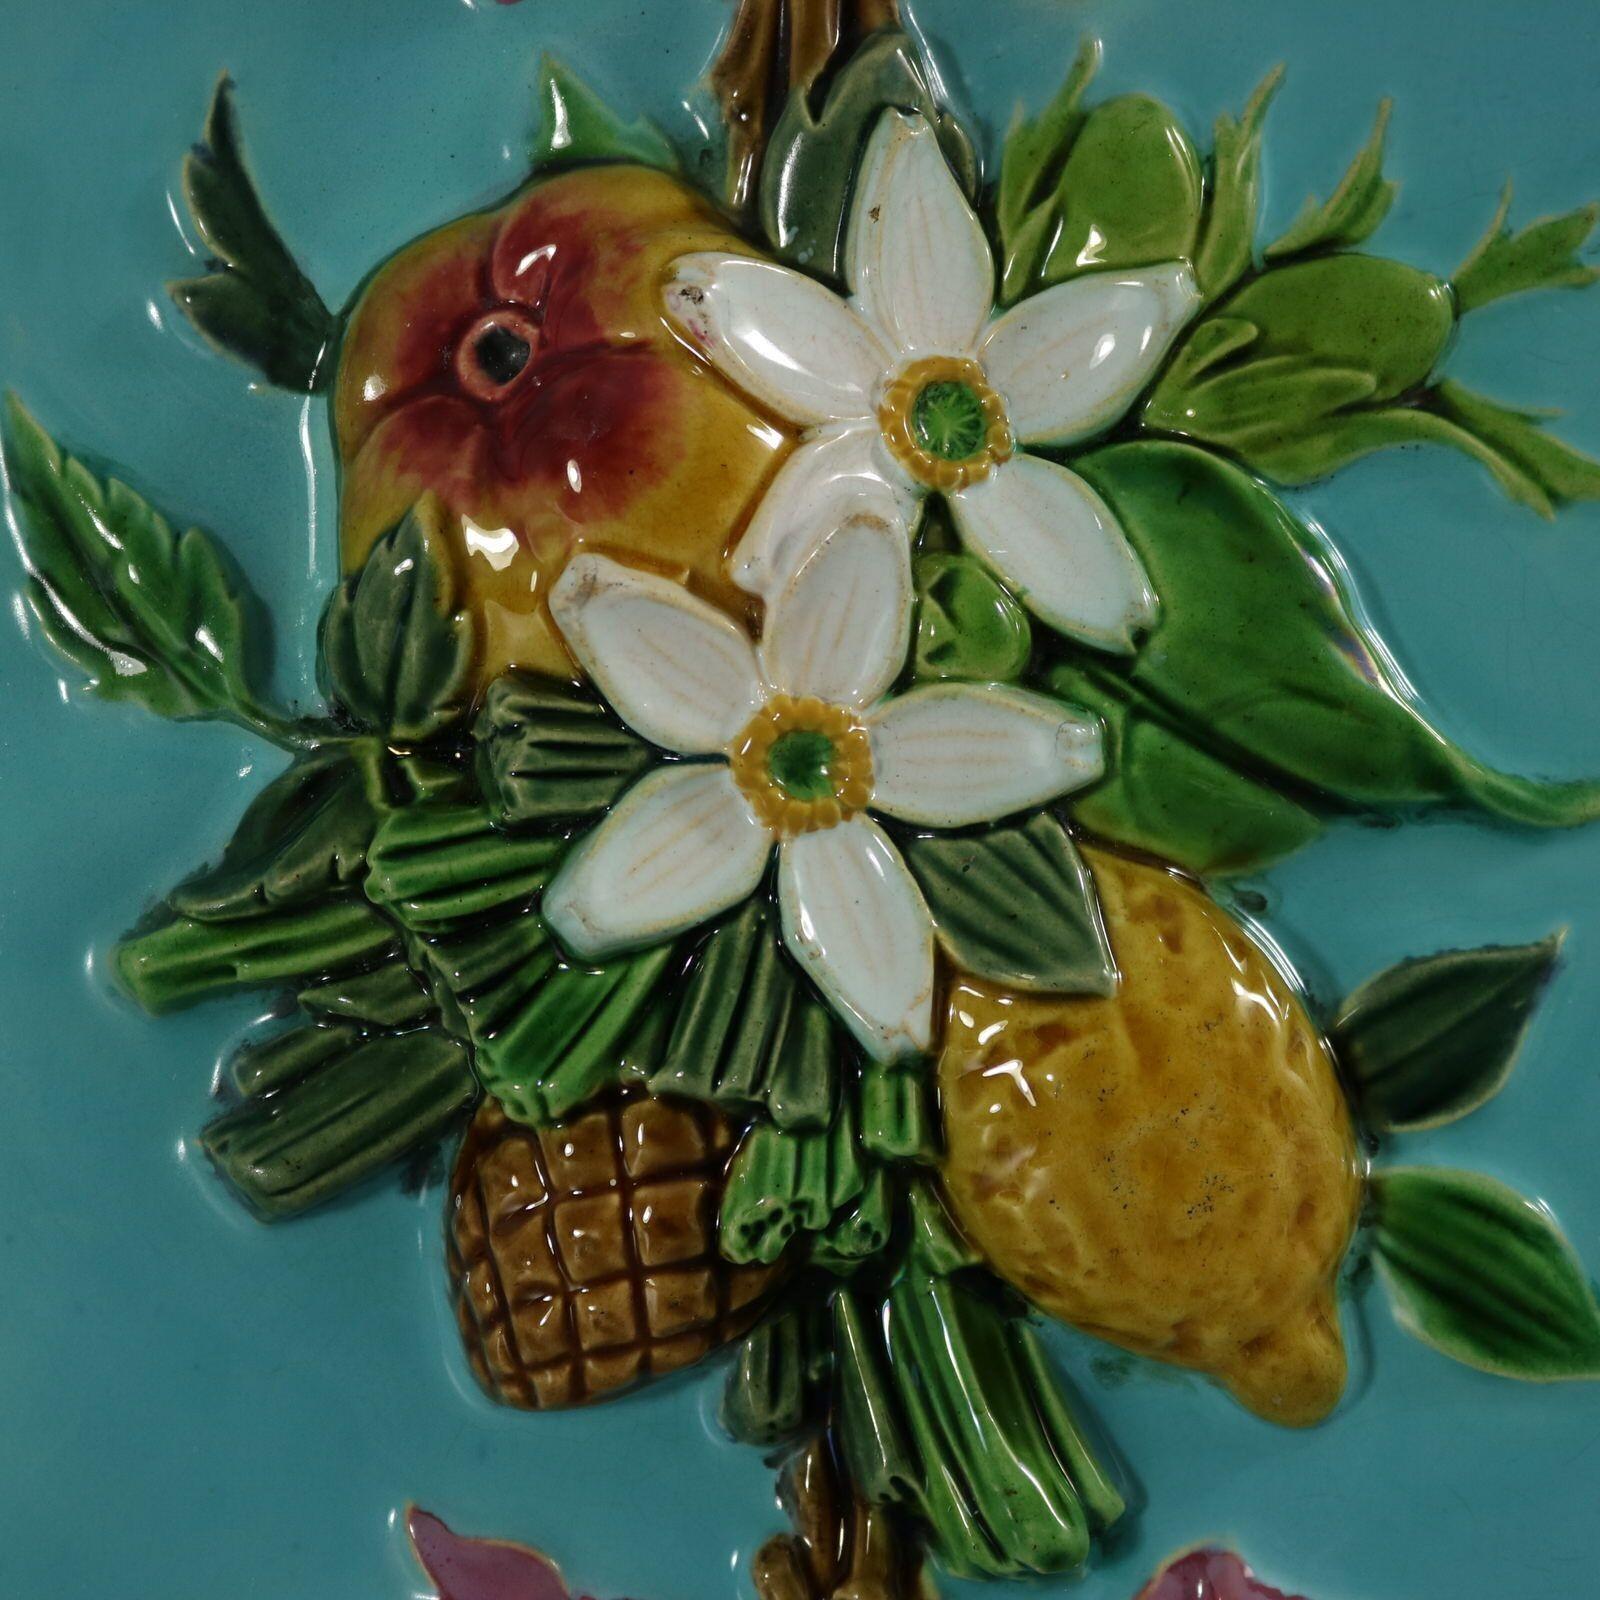 Minton Majolica tile which features an assemblage of fruit, flowers and leaves, including an apple, a lemon and a pinecone. Ribbons on either side. Colouration: turquoise, green, white, are predominant. The piece bears maker's marks for the Minton